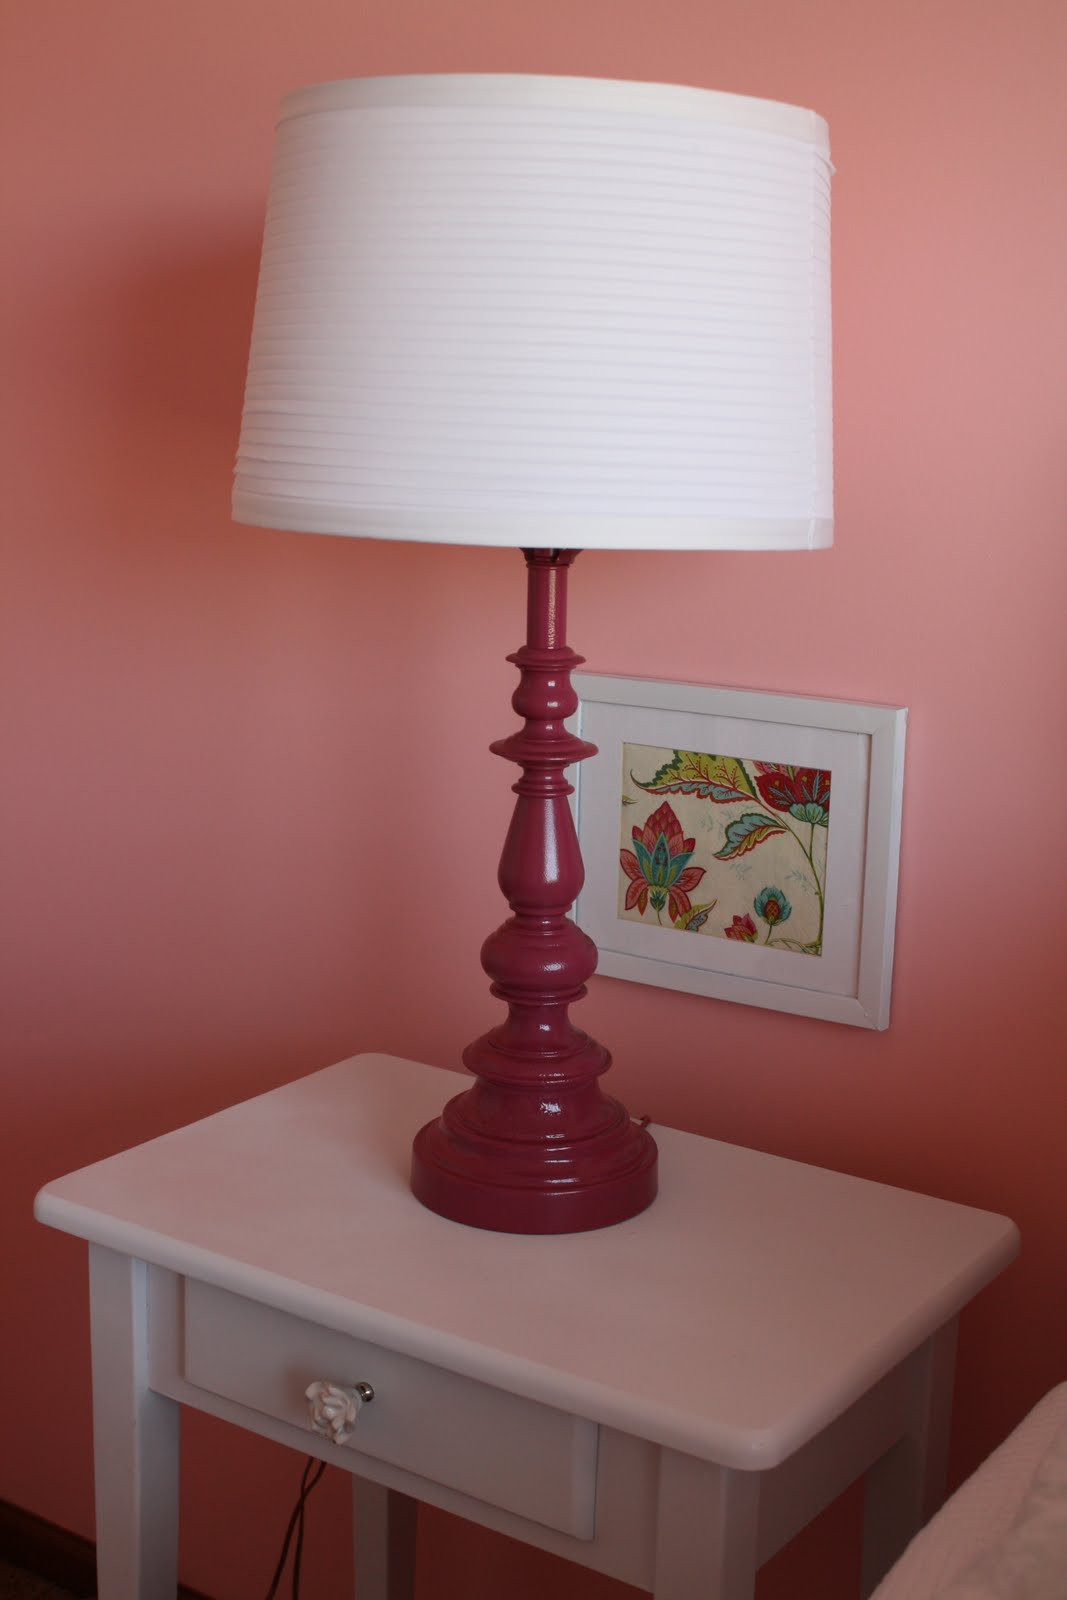 Girls Bedroom Lamp
 So Stinkin Cute Glamour Girl Bedroom Lamps and such